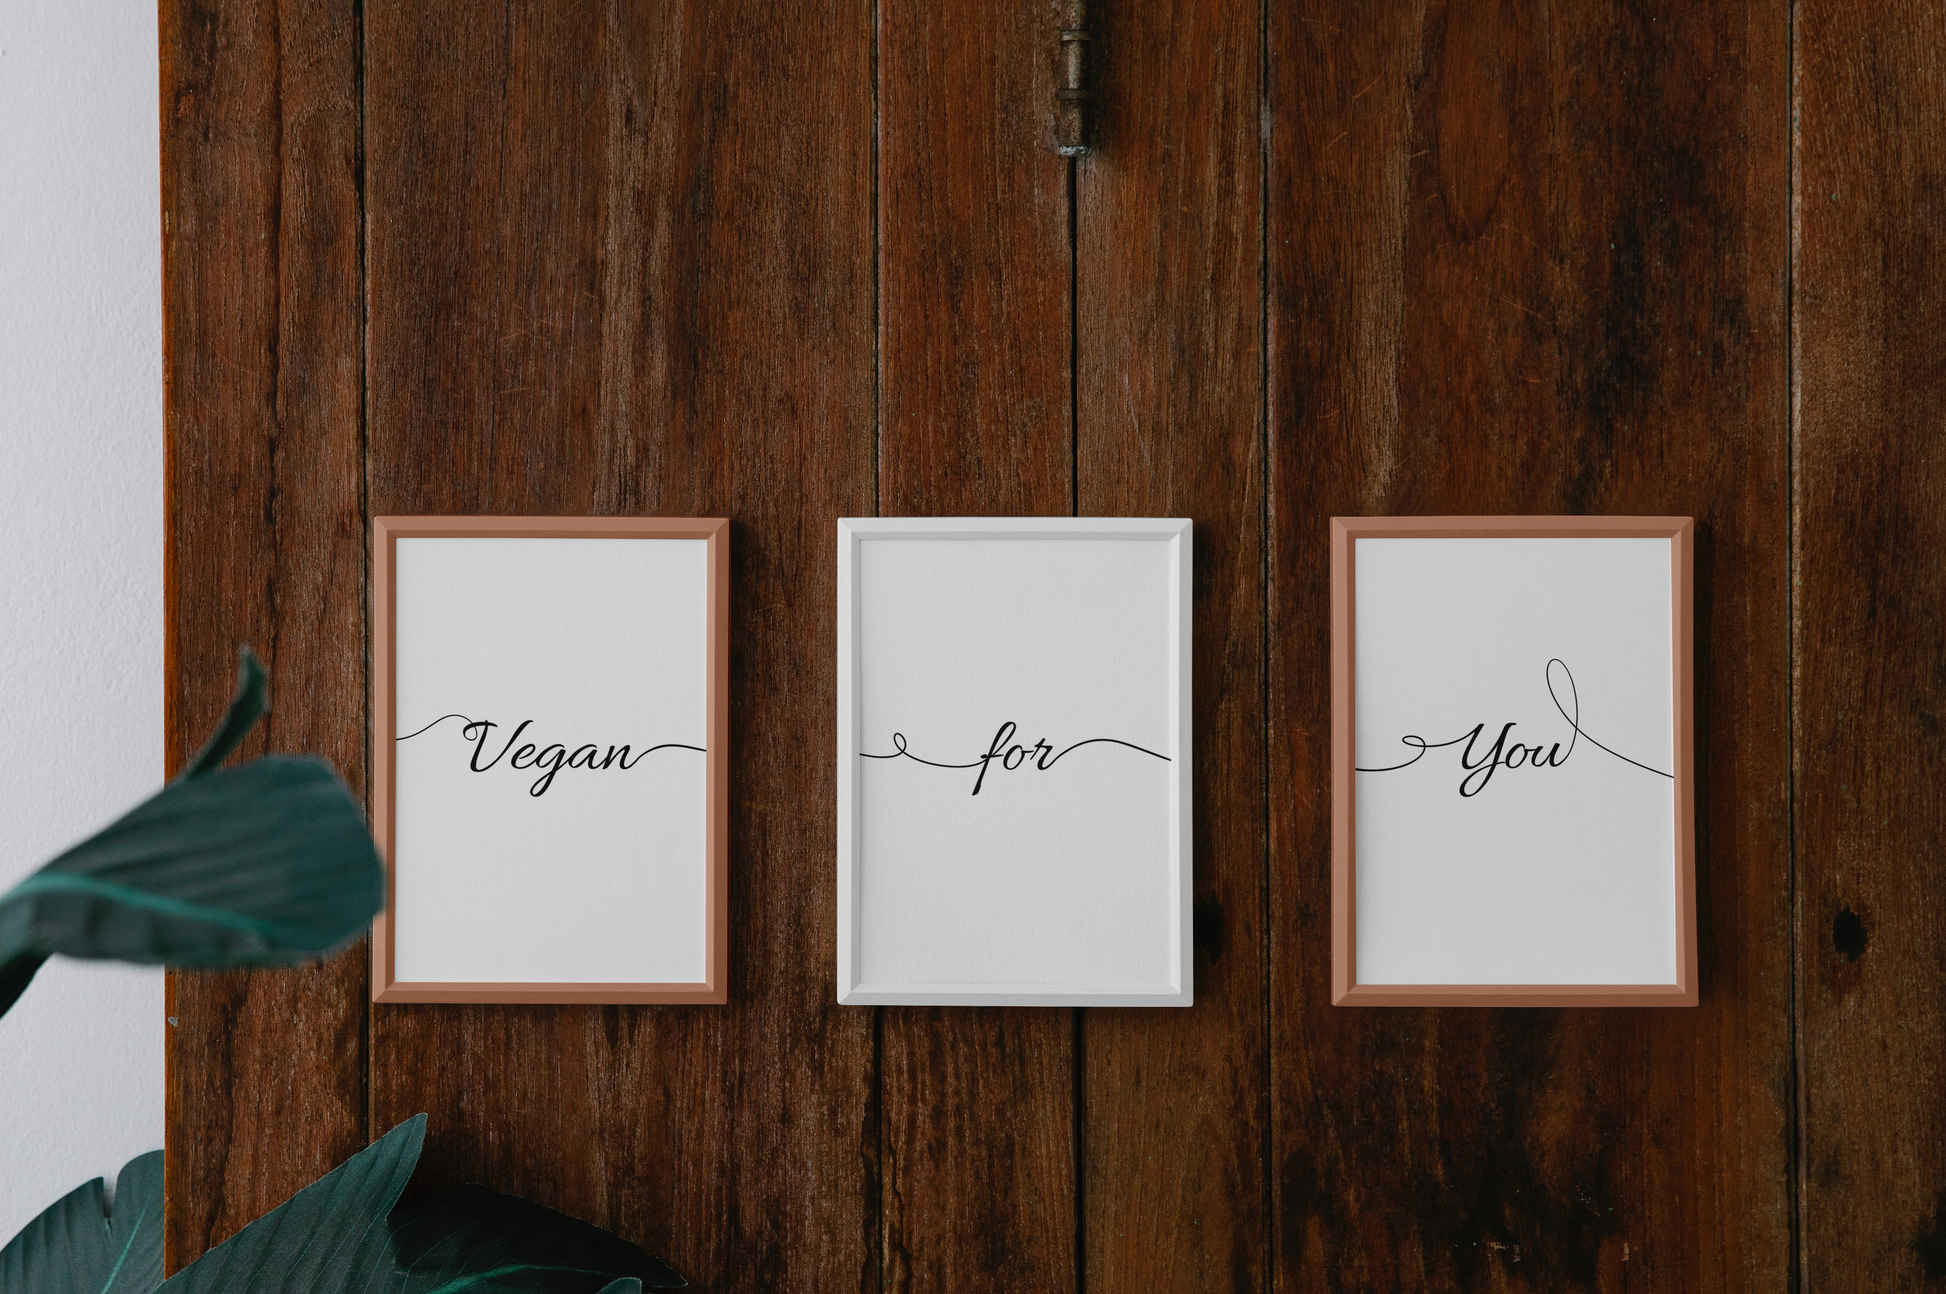 Three framed printable digital paintings in a row on a wooden wall, reading 'Vegan', 'for', 'You' in cursive font, with a modern home decor vibe.